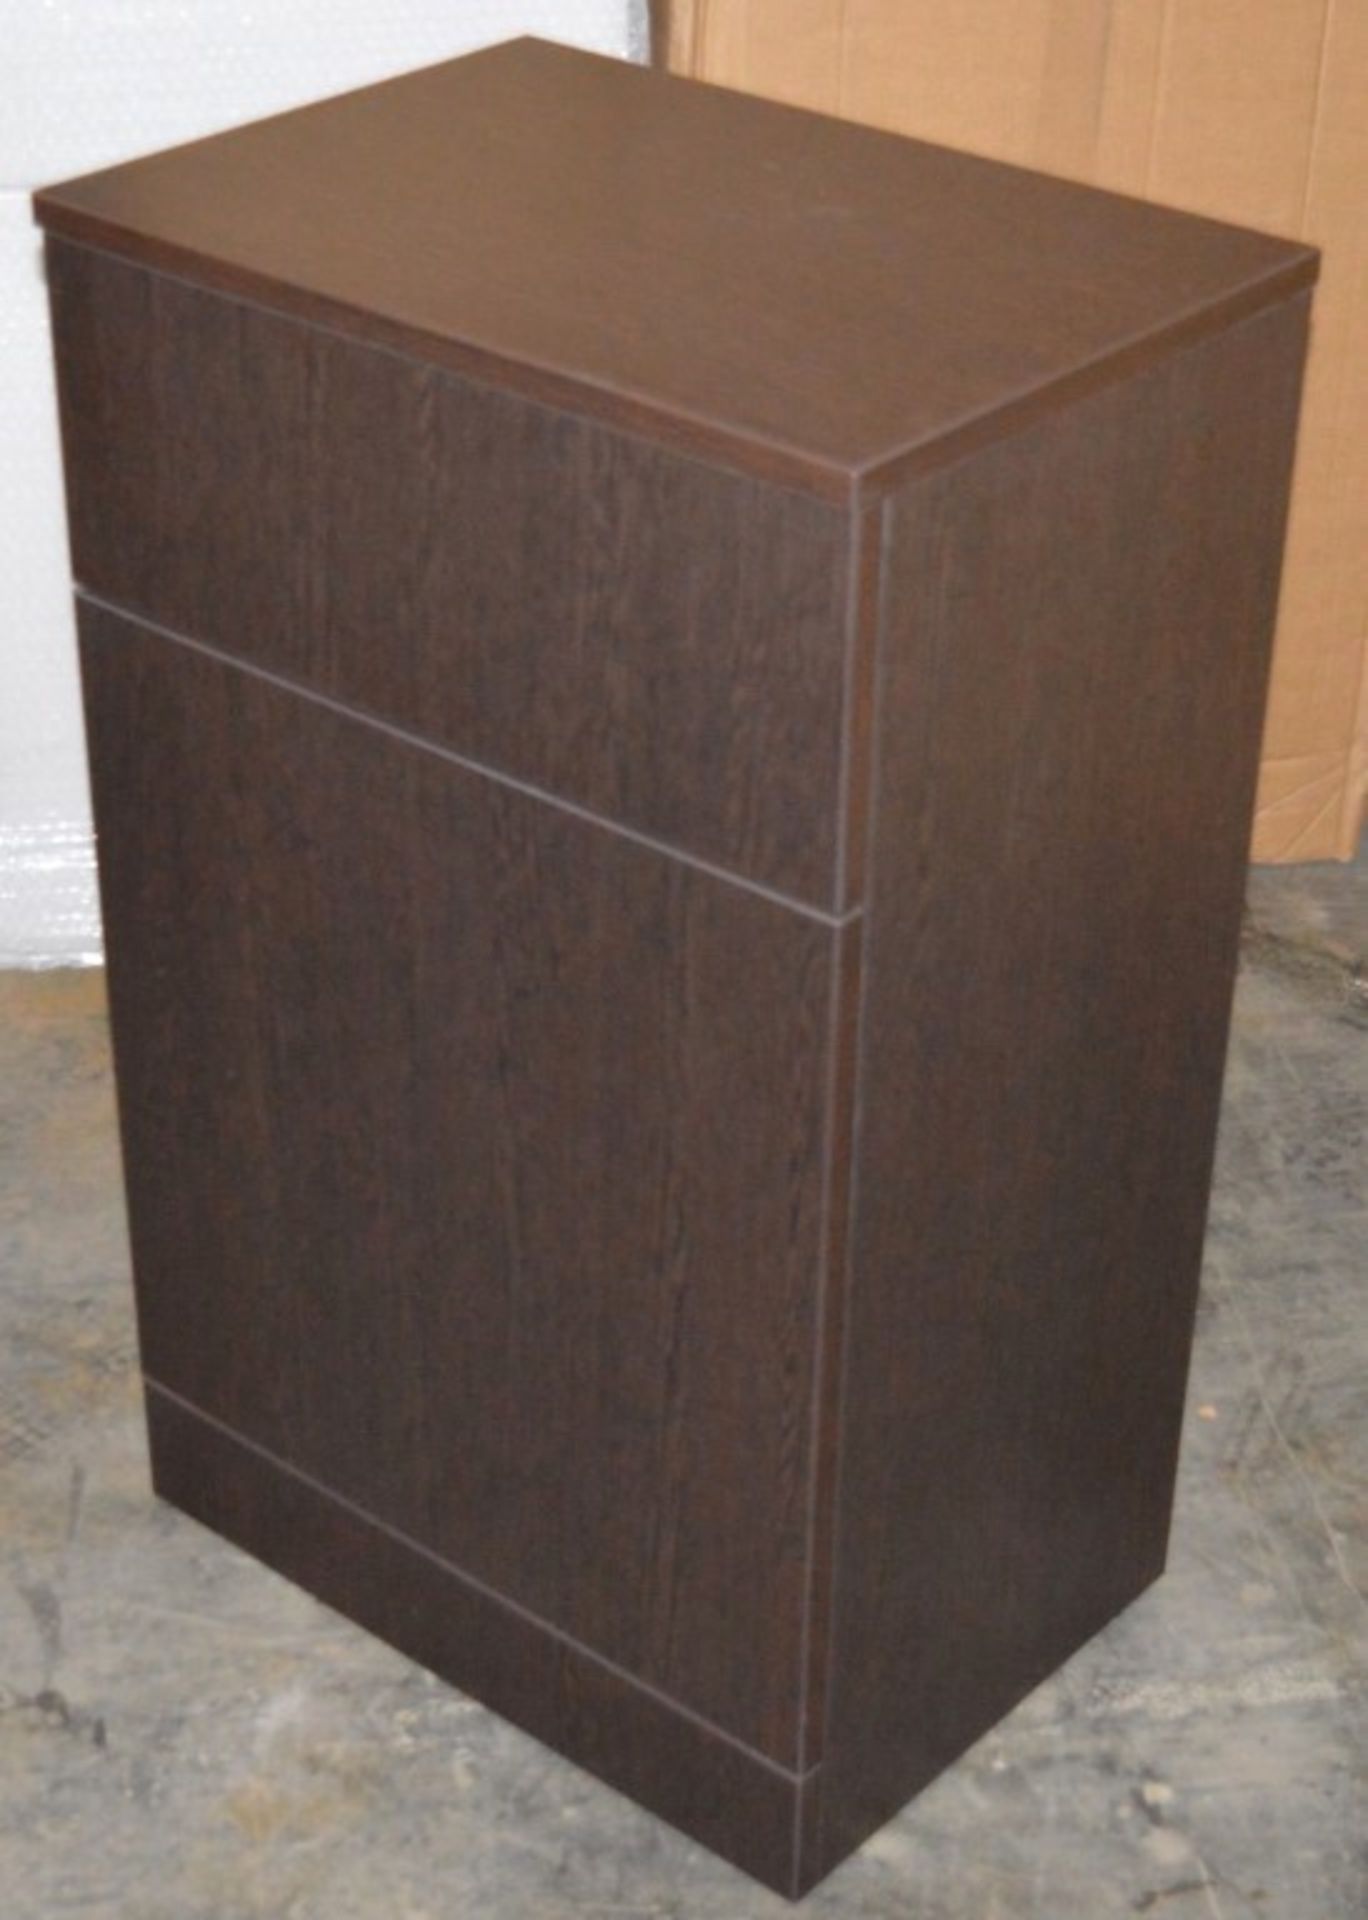 1 x Venizia BTW Toilet Pan Unit in Wenge With Concealed Cistern - 500mm Width - Brand New Boxed